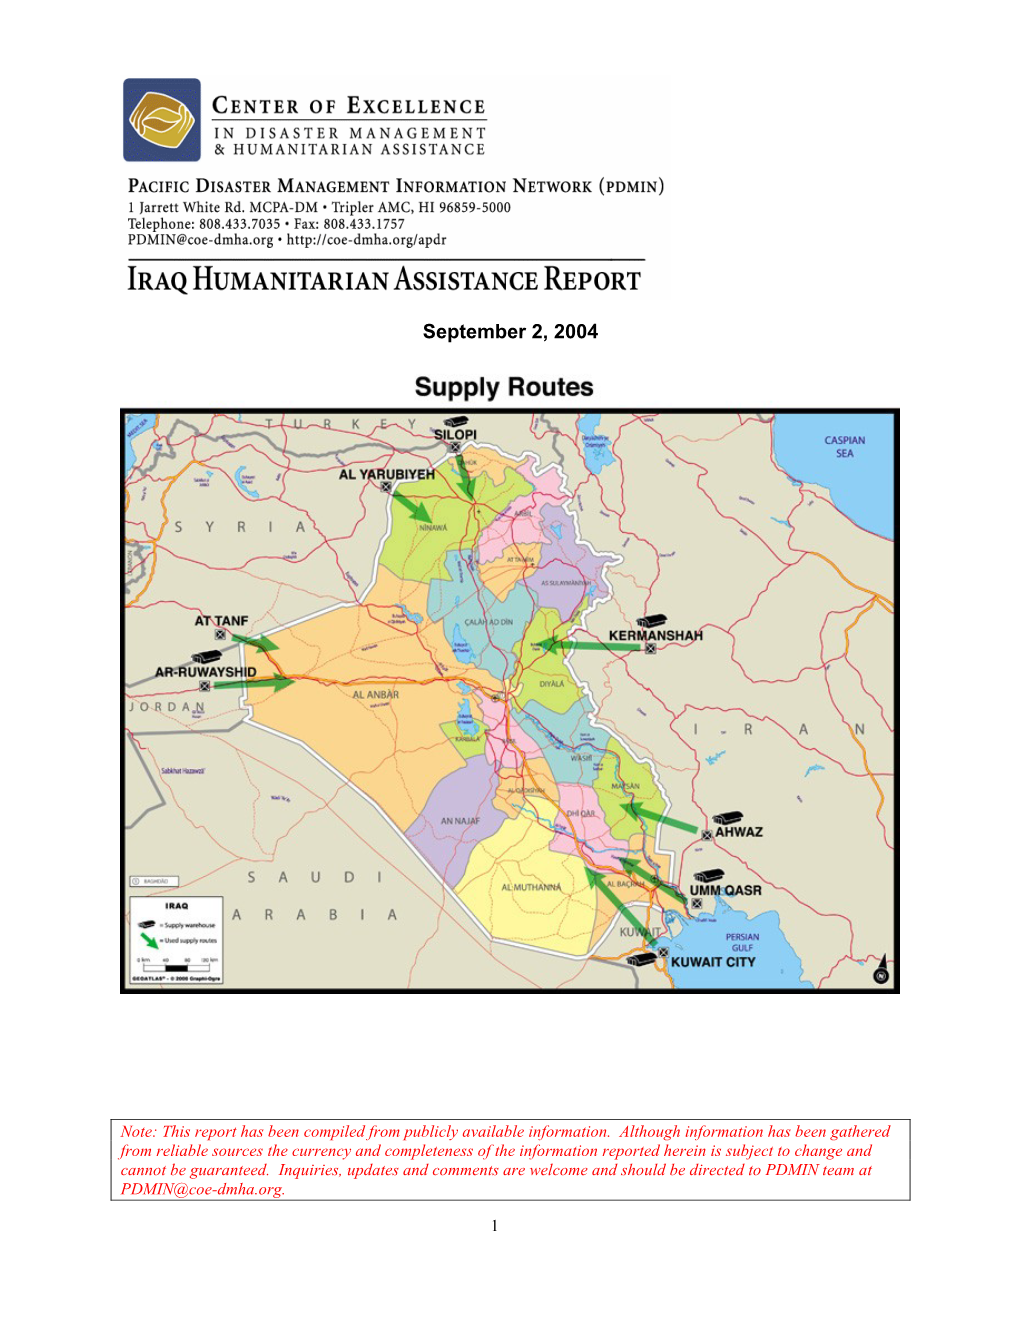 Iraqis; Food Distribution OK; Infrastructure Improving Very Slowly; Reconstruction and Humanitarian Operations Slow;